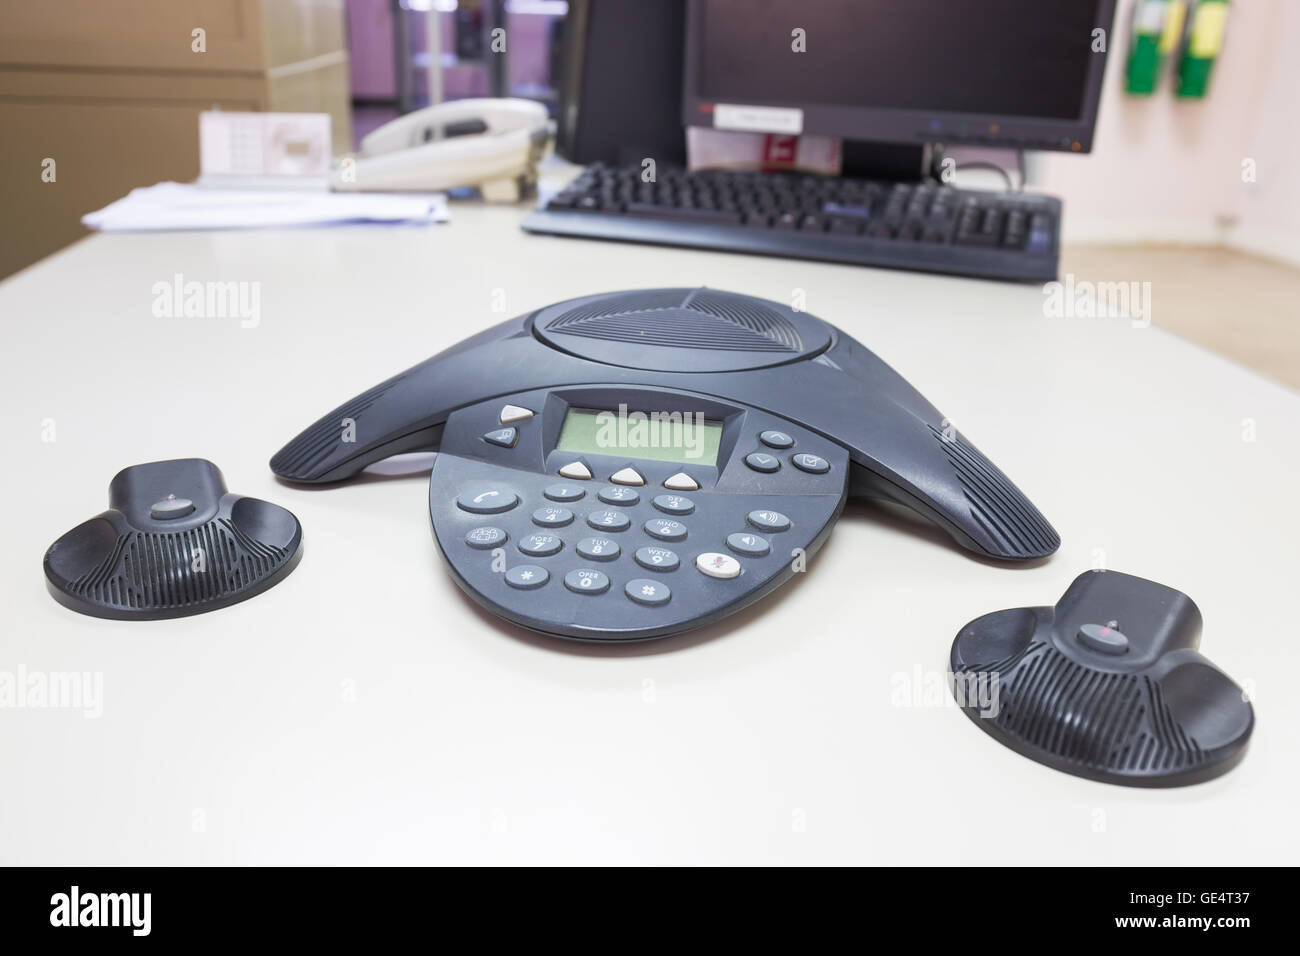 Conference IP phone on white table background Stock Photo